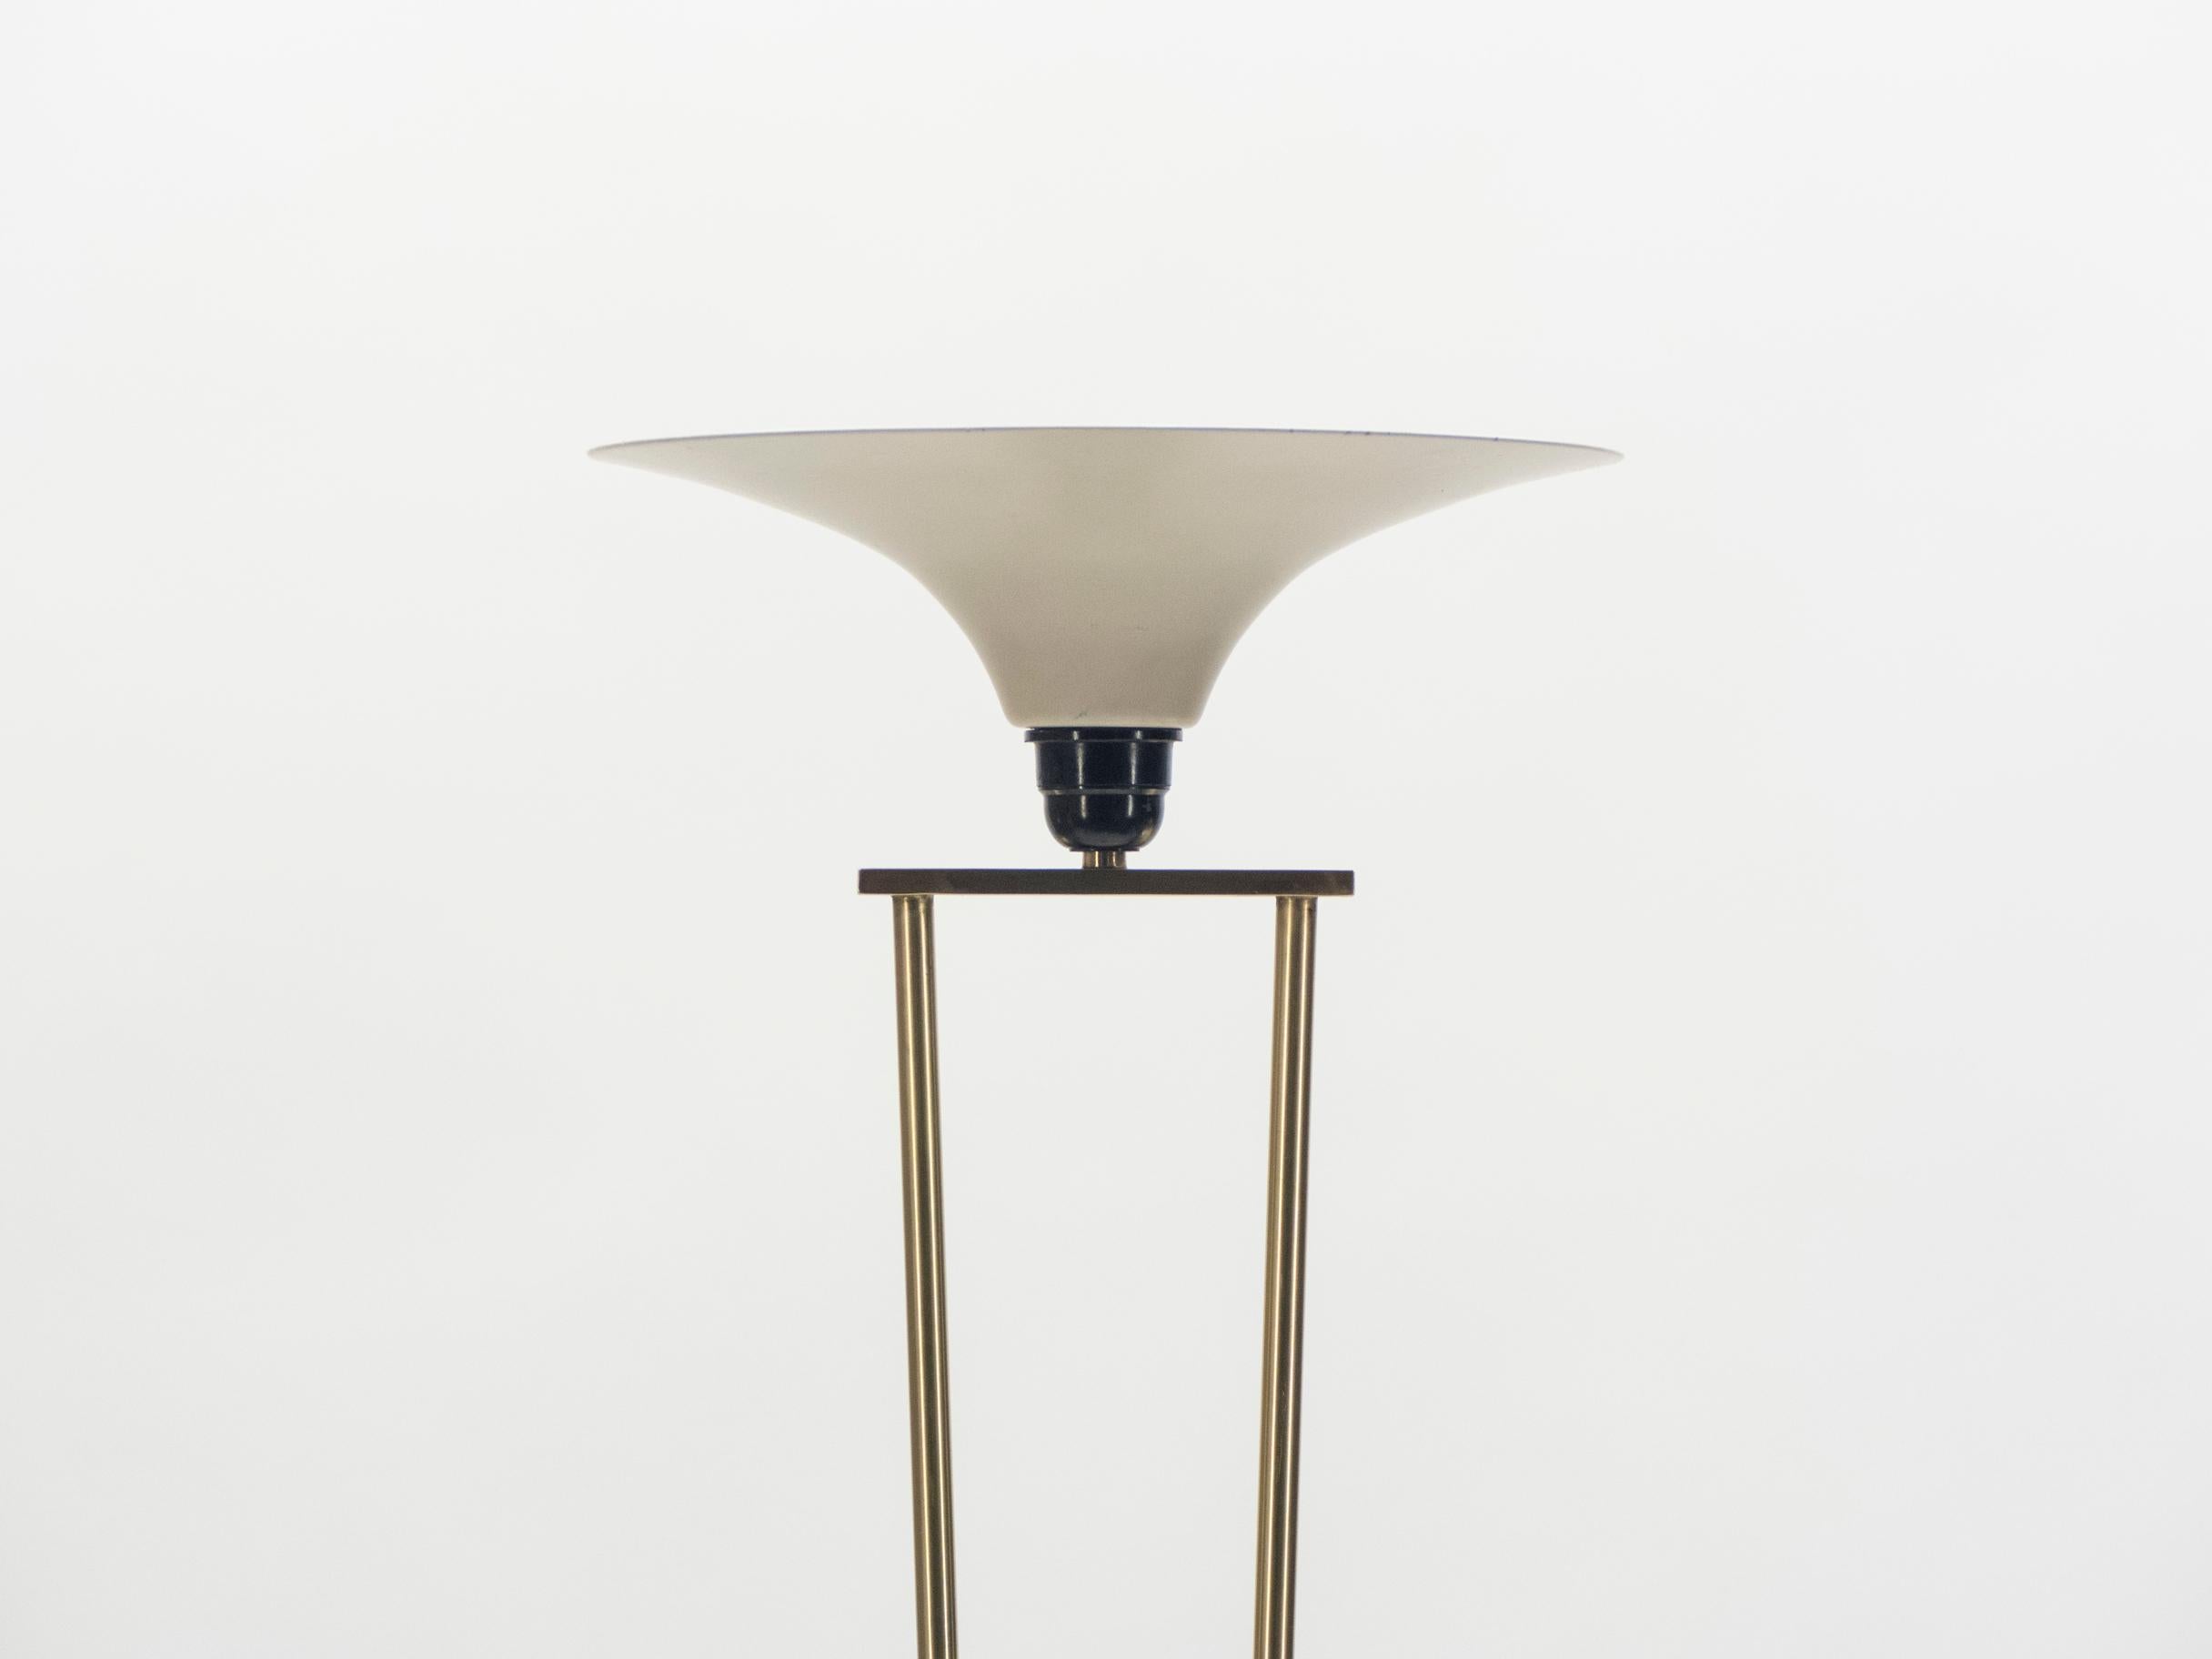 Tall brass legs curve gently into the gorgeous marble base of this midcentury 1960s floor lamp. The lamp covering is made of a milky opaline and has a chic, fluted shape. The overall effect is instantly charming. The high-quality piece is made by